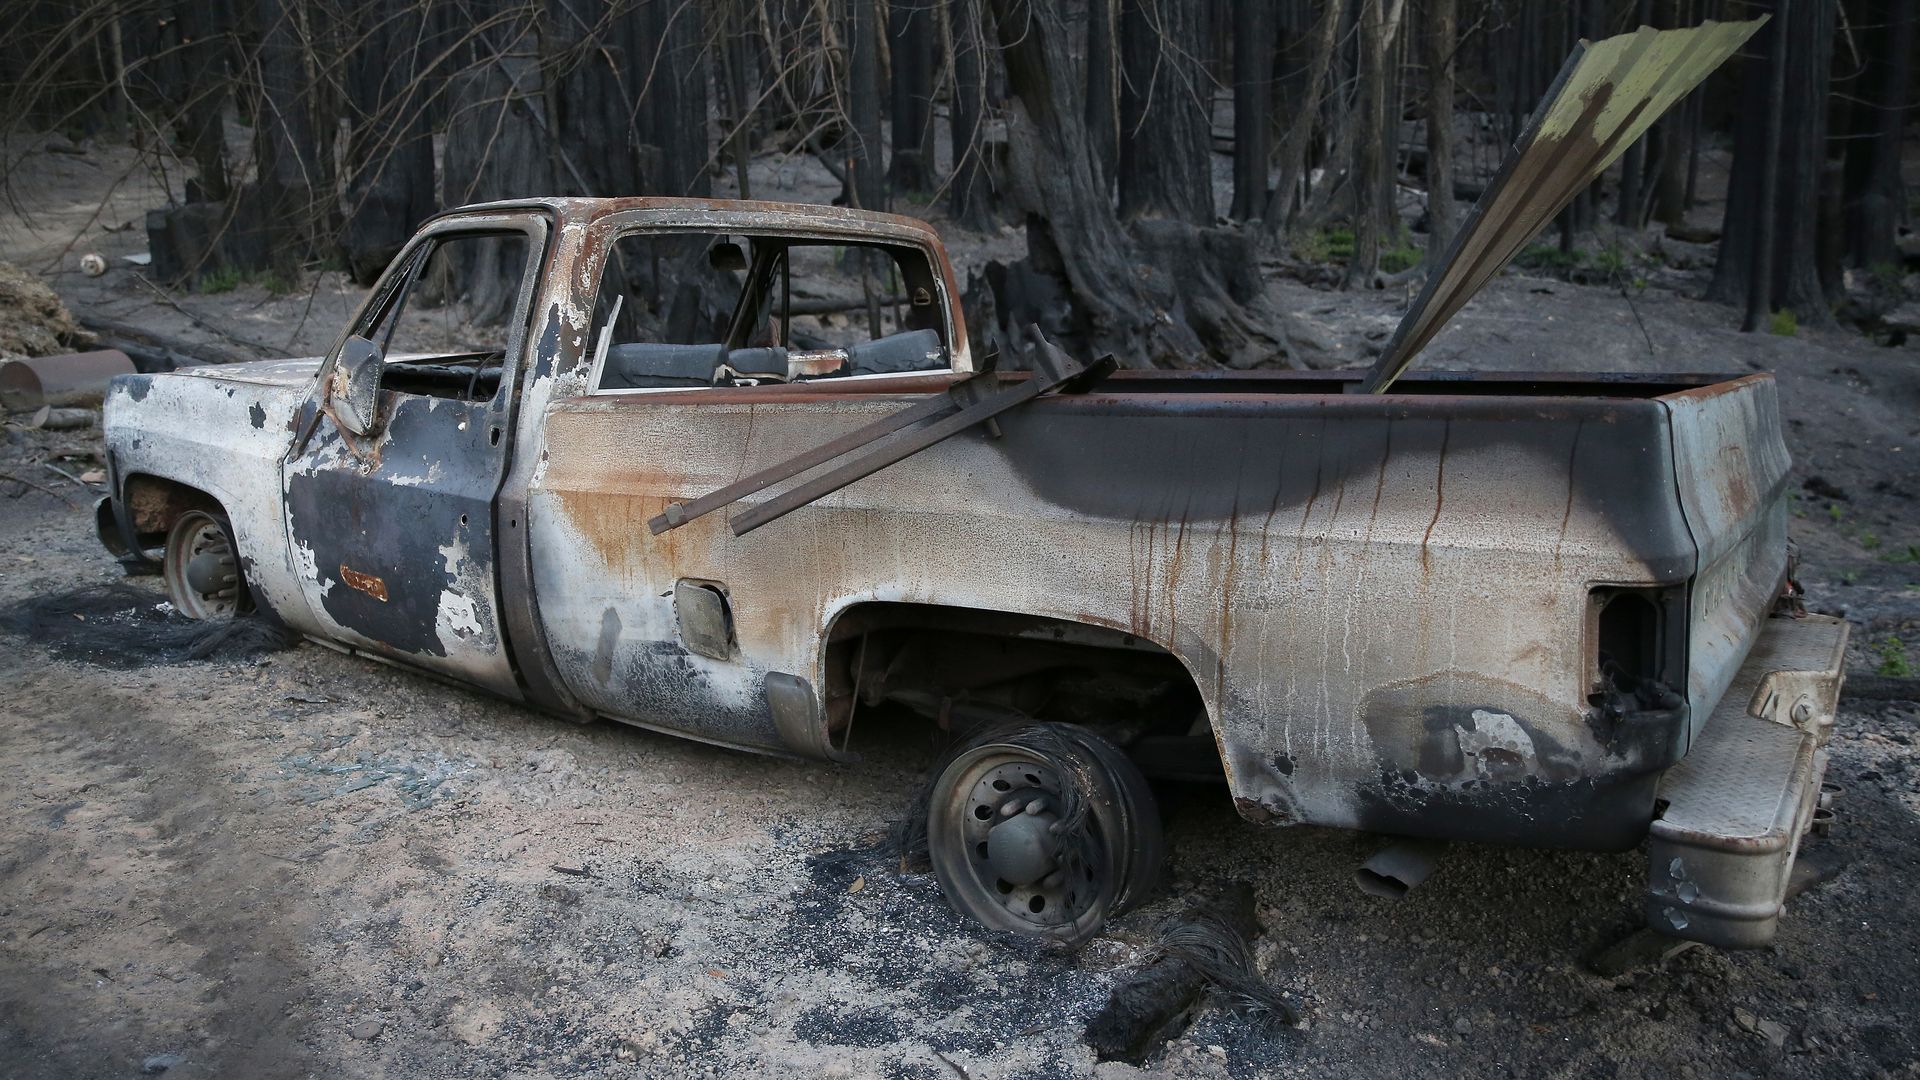  A burned truck is seen as Satchel MacLennan surveys the damage to his family's property in Last Chance, Calif.